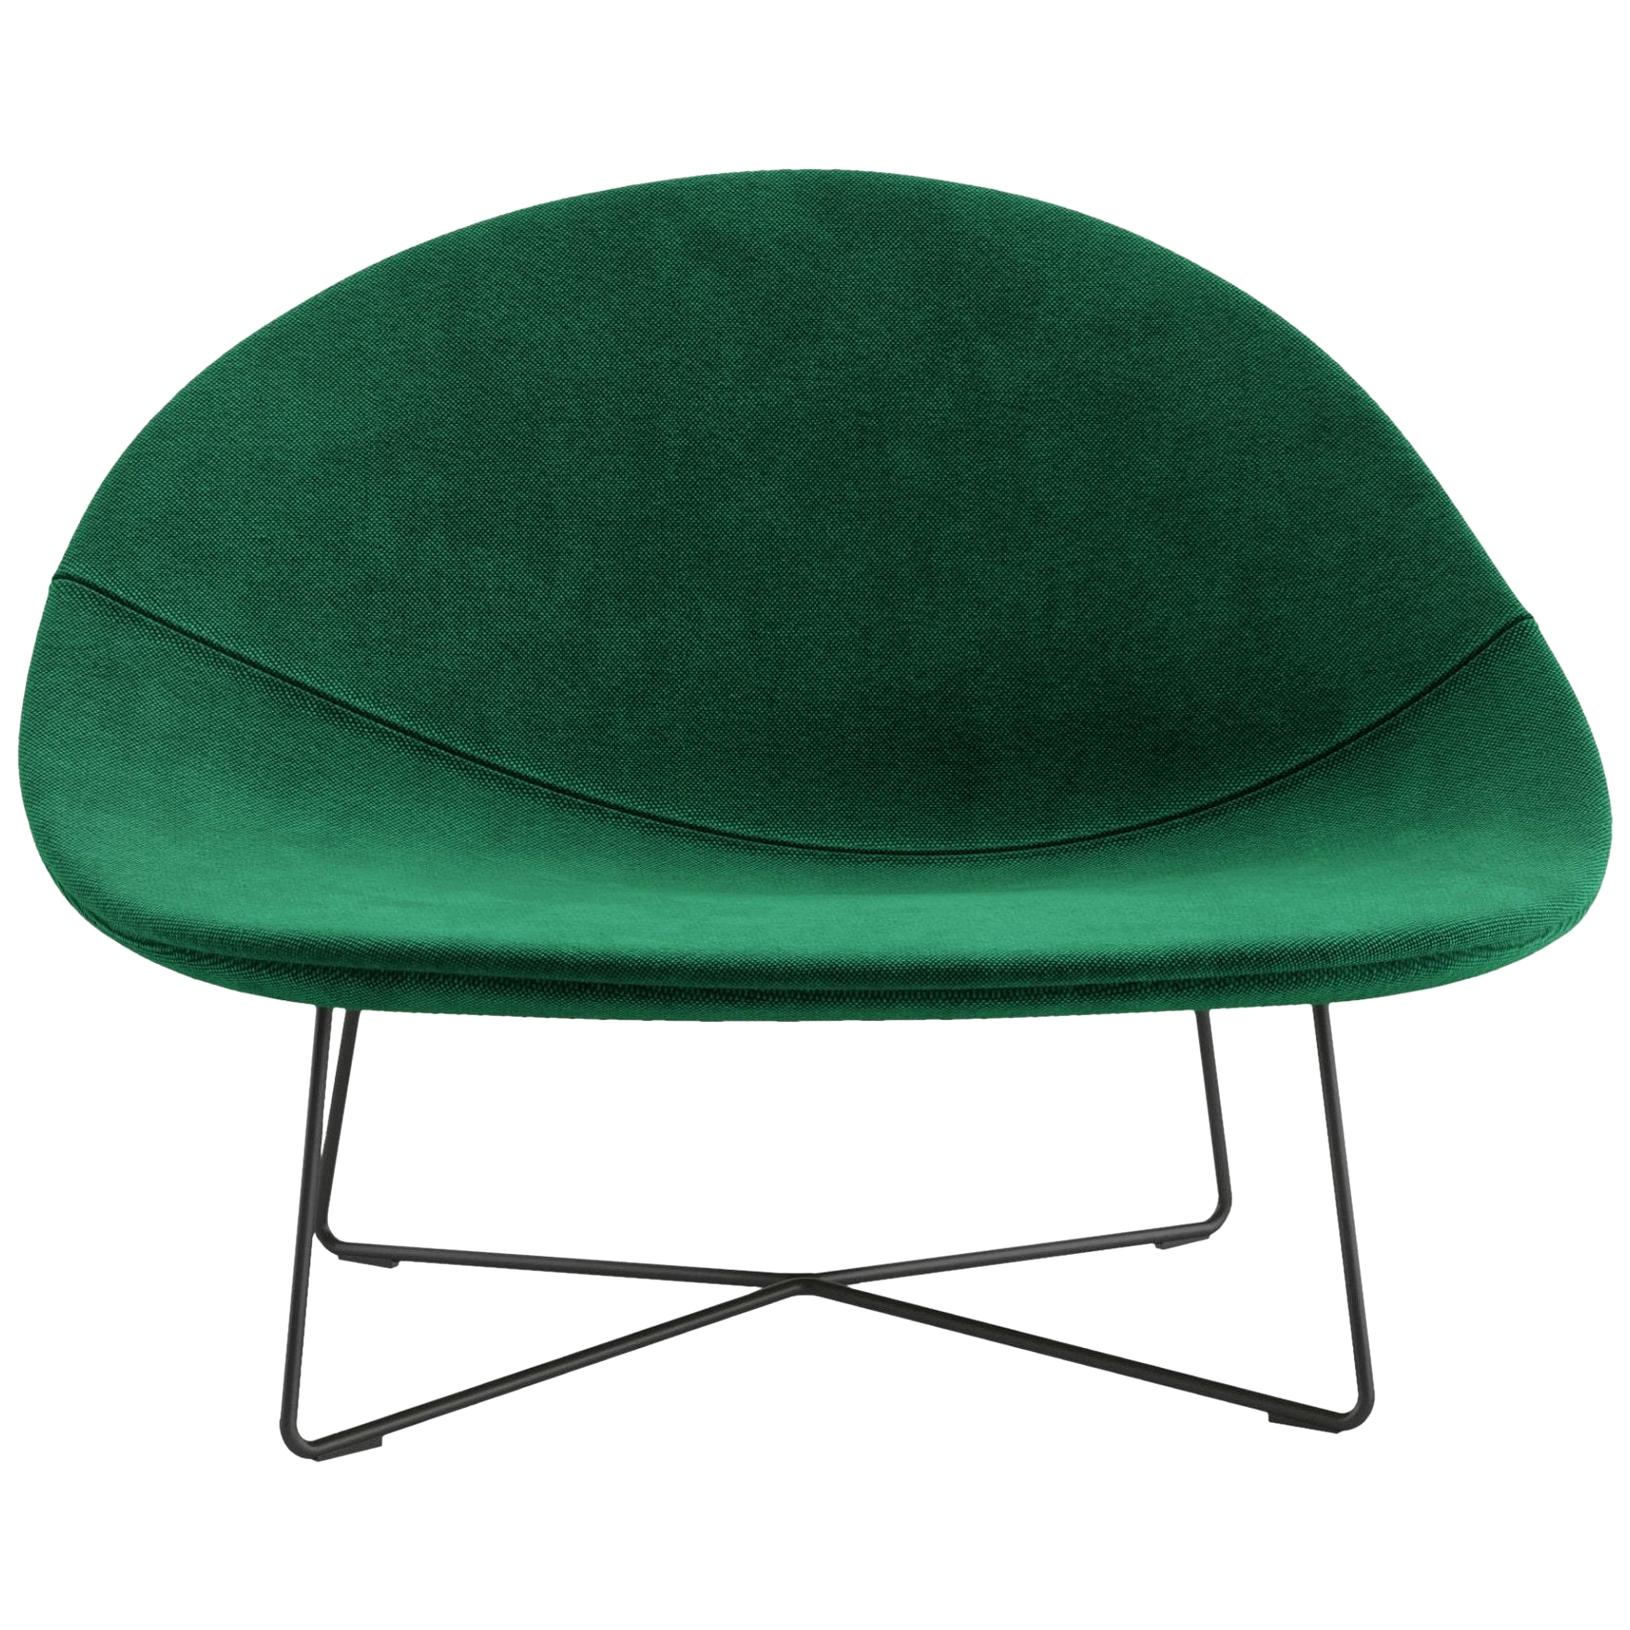 Customizable Tacchini Isola Lounge Chair by Claesson Koivisto Rune For Sale